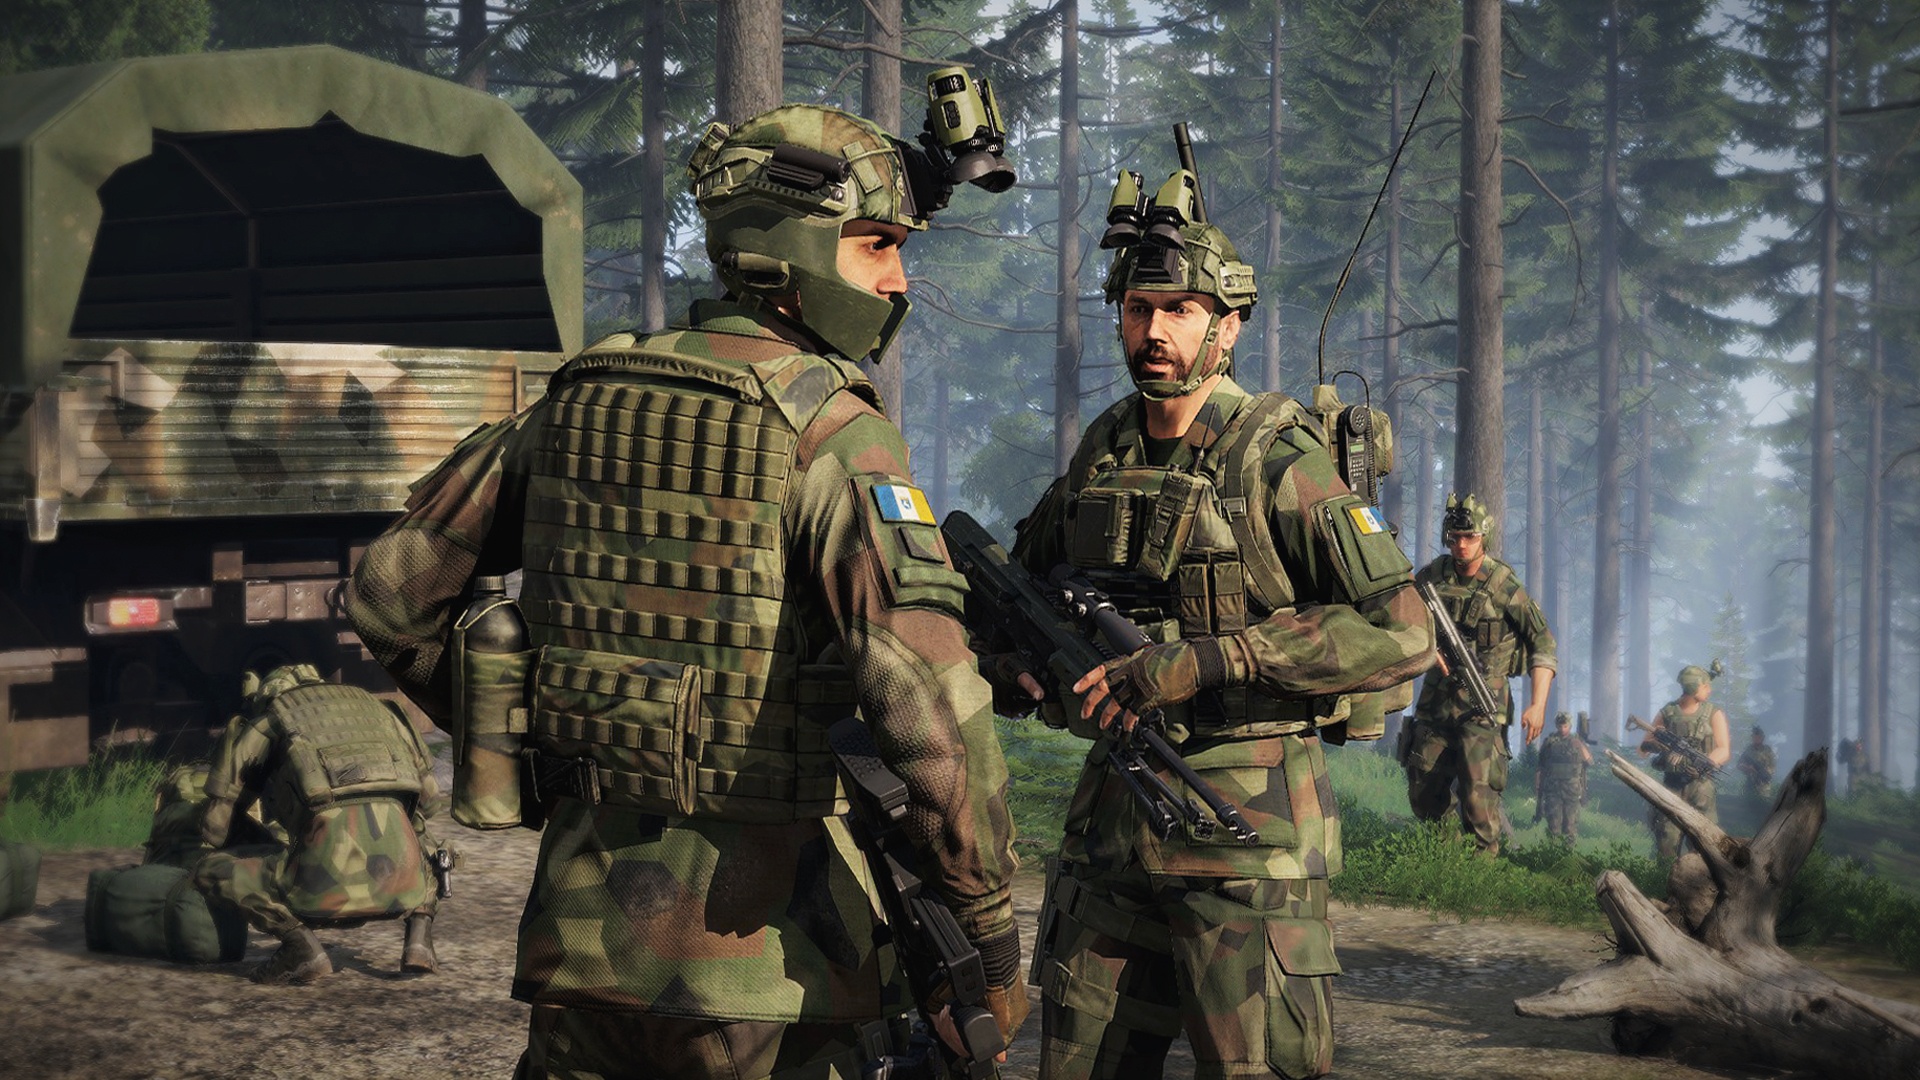 Steam Community :: Guide :: Complete Guide to Arma 3